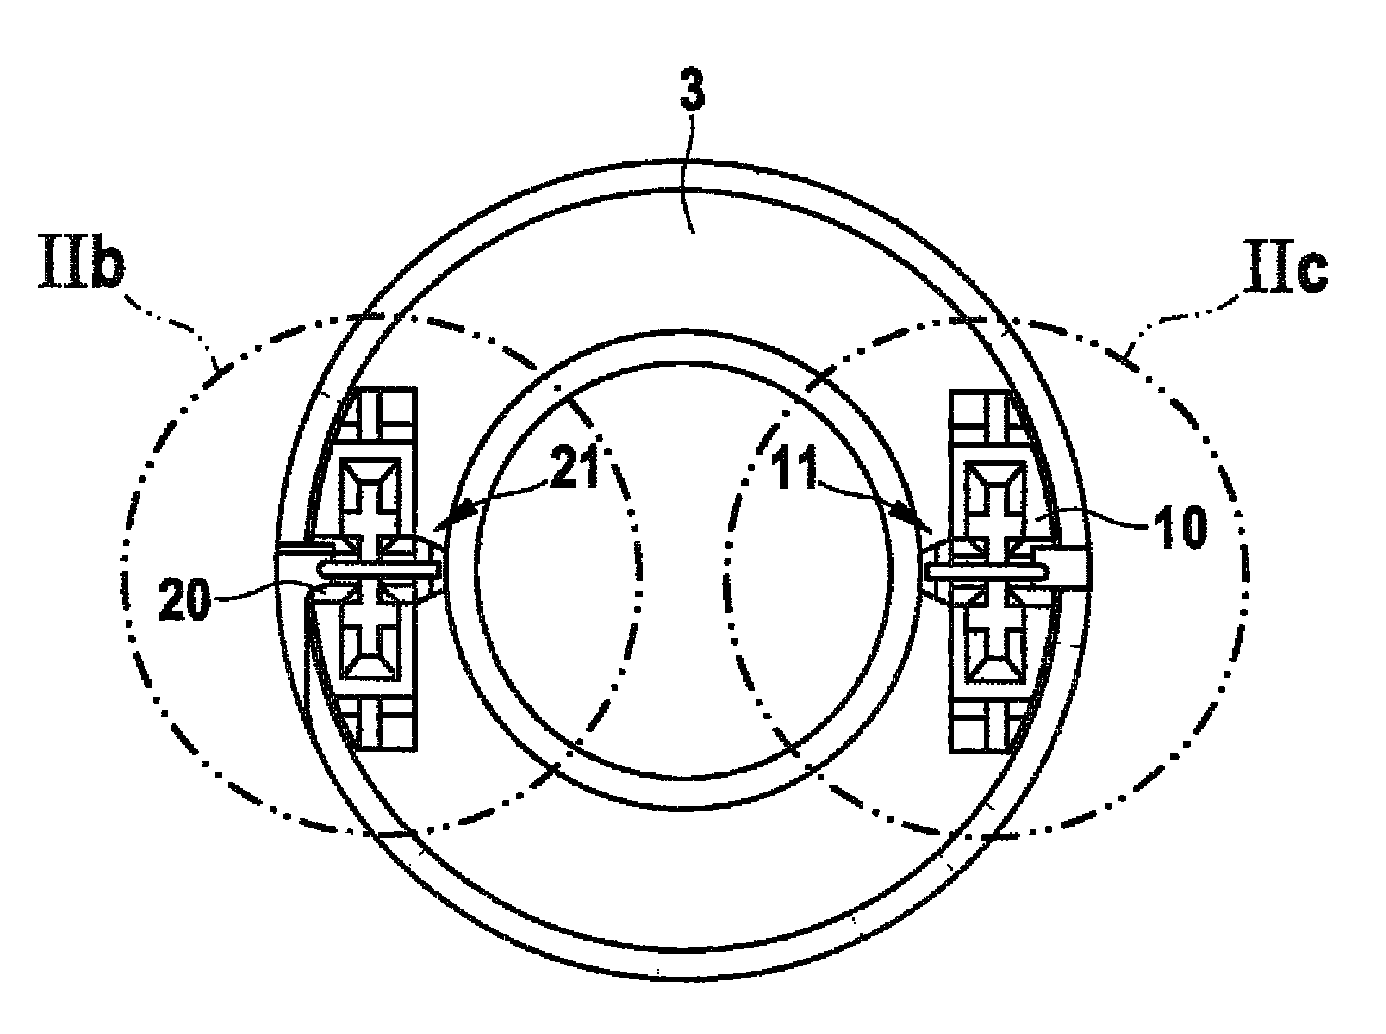 Method and arrangement for winding a winding wire onto a winding body and associated magnet assembly for a solenoid valve